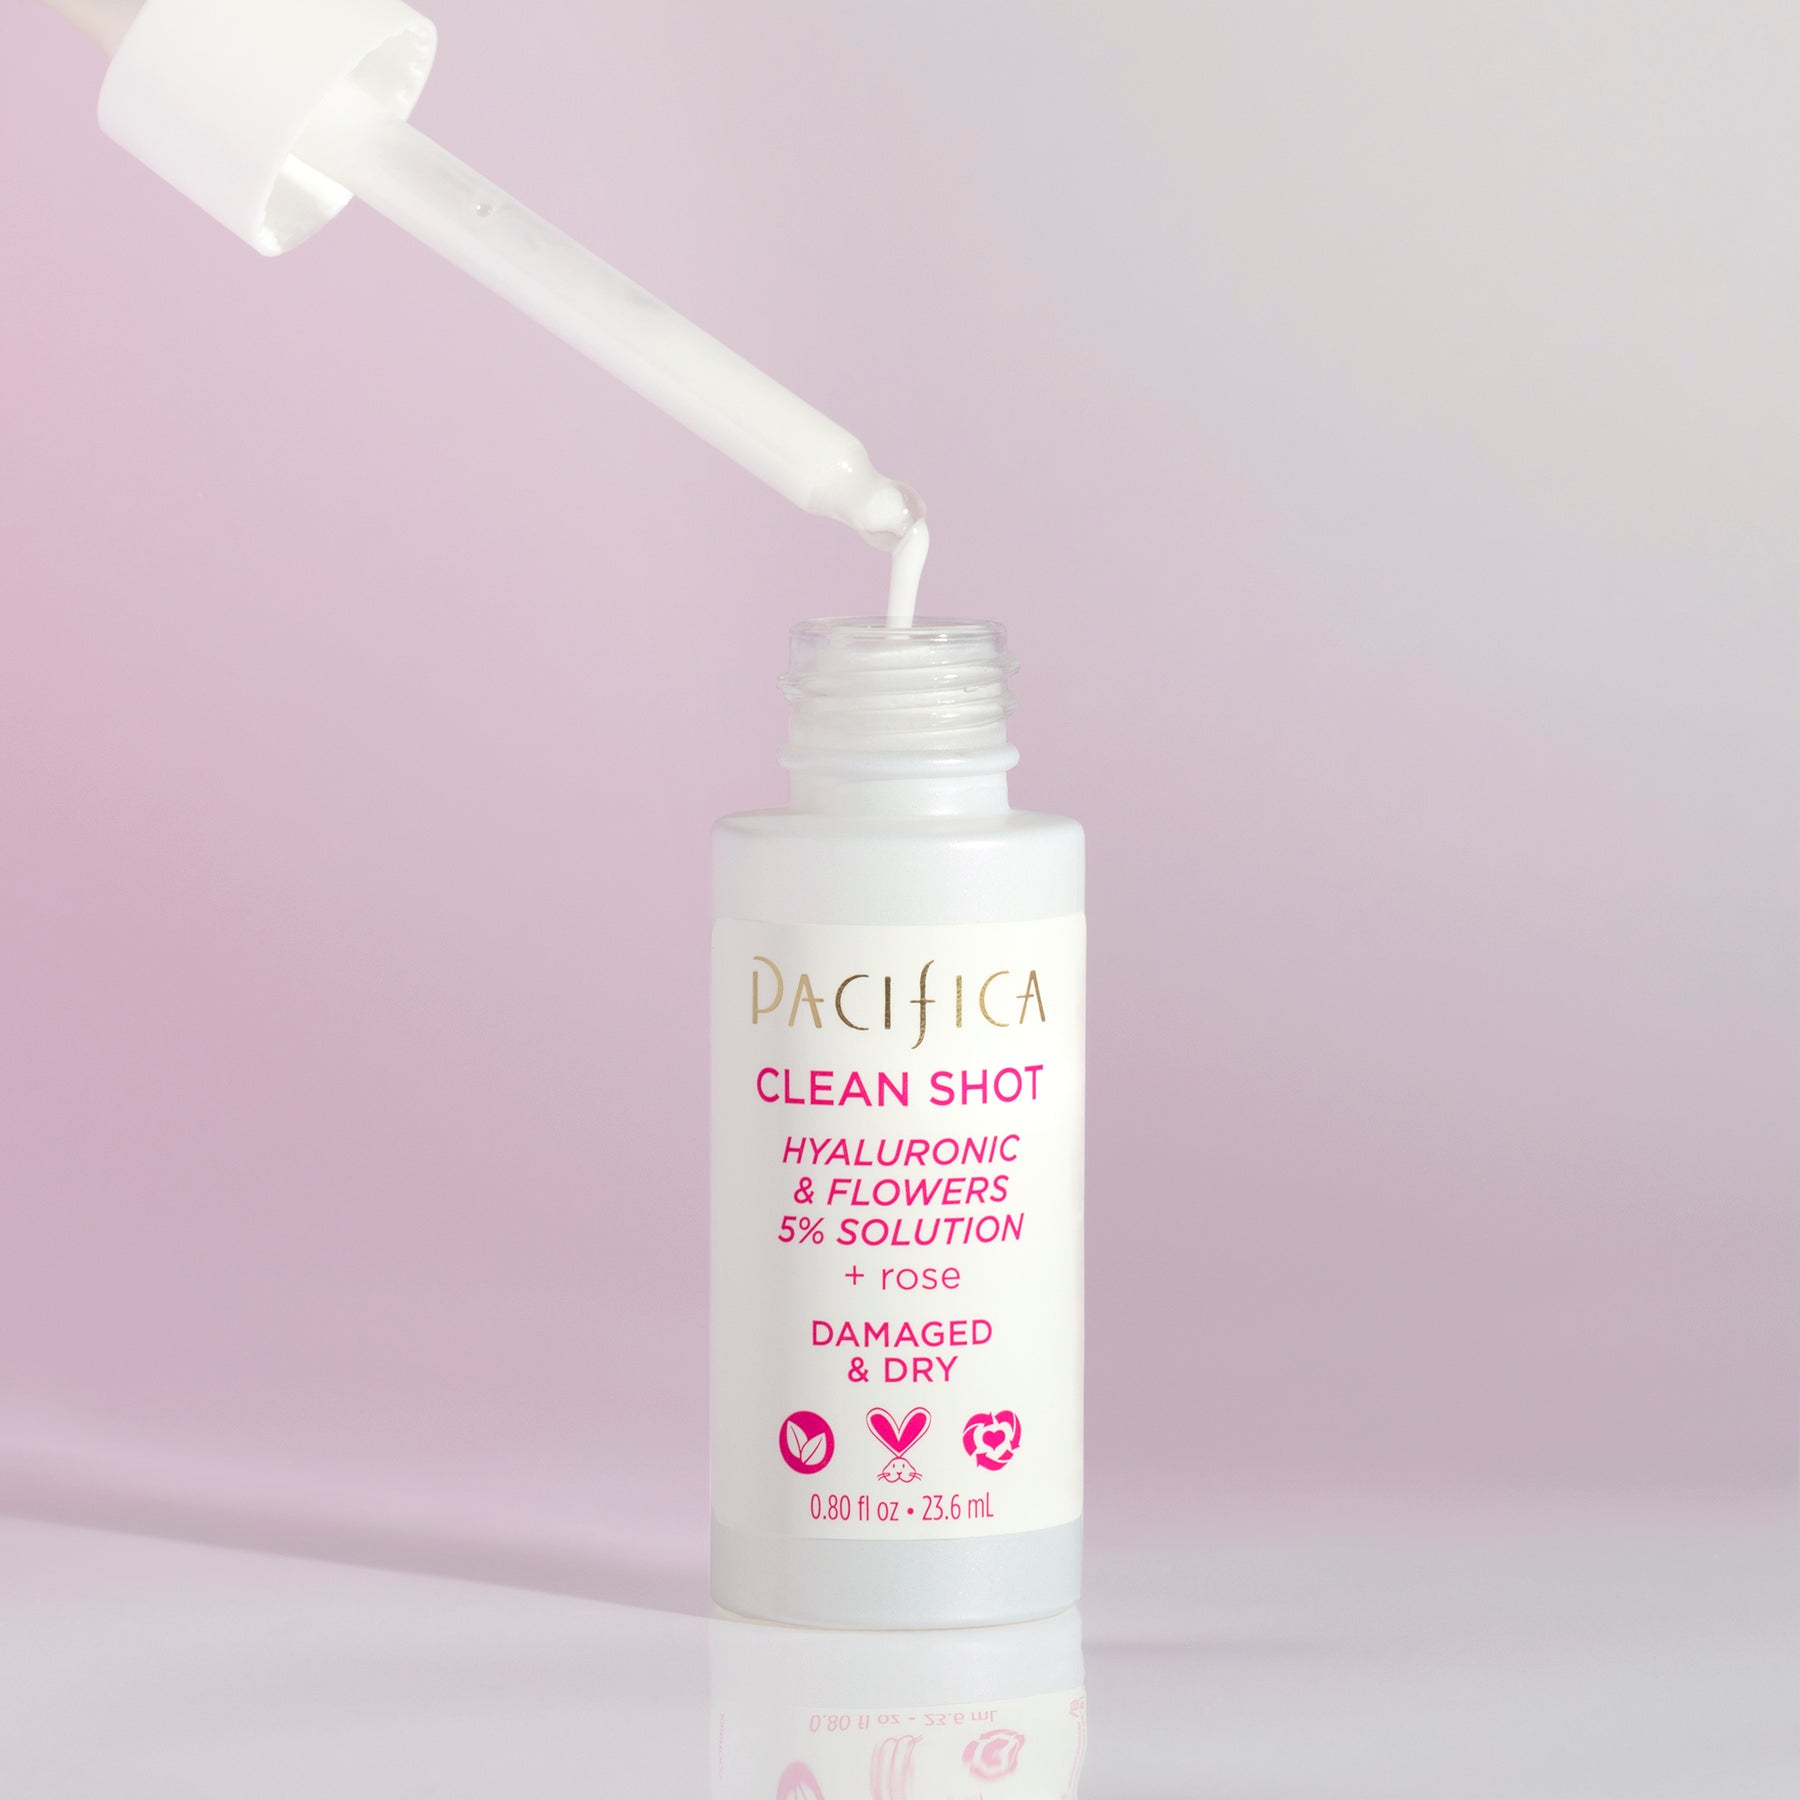 Clean Shot - Hyaluronic & Flowers 5% Solution - Skin Care - Pacifica Beauty